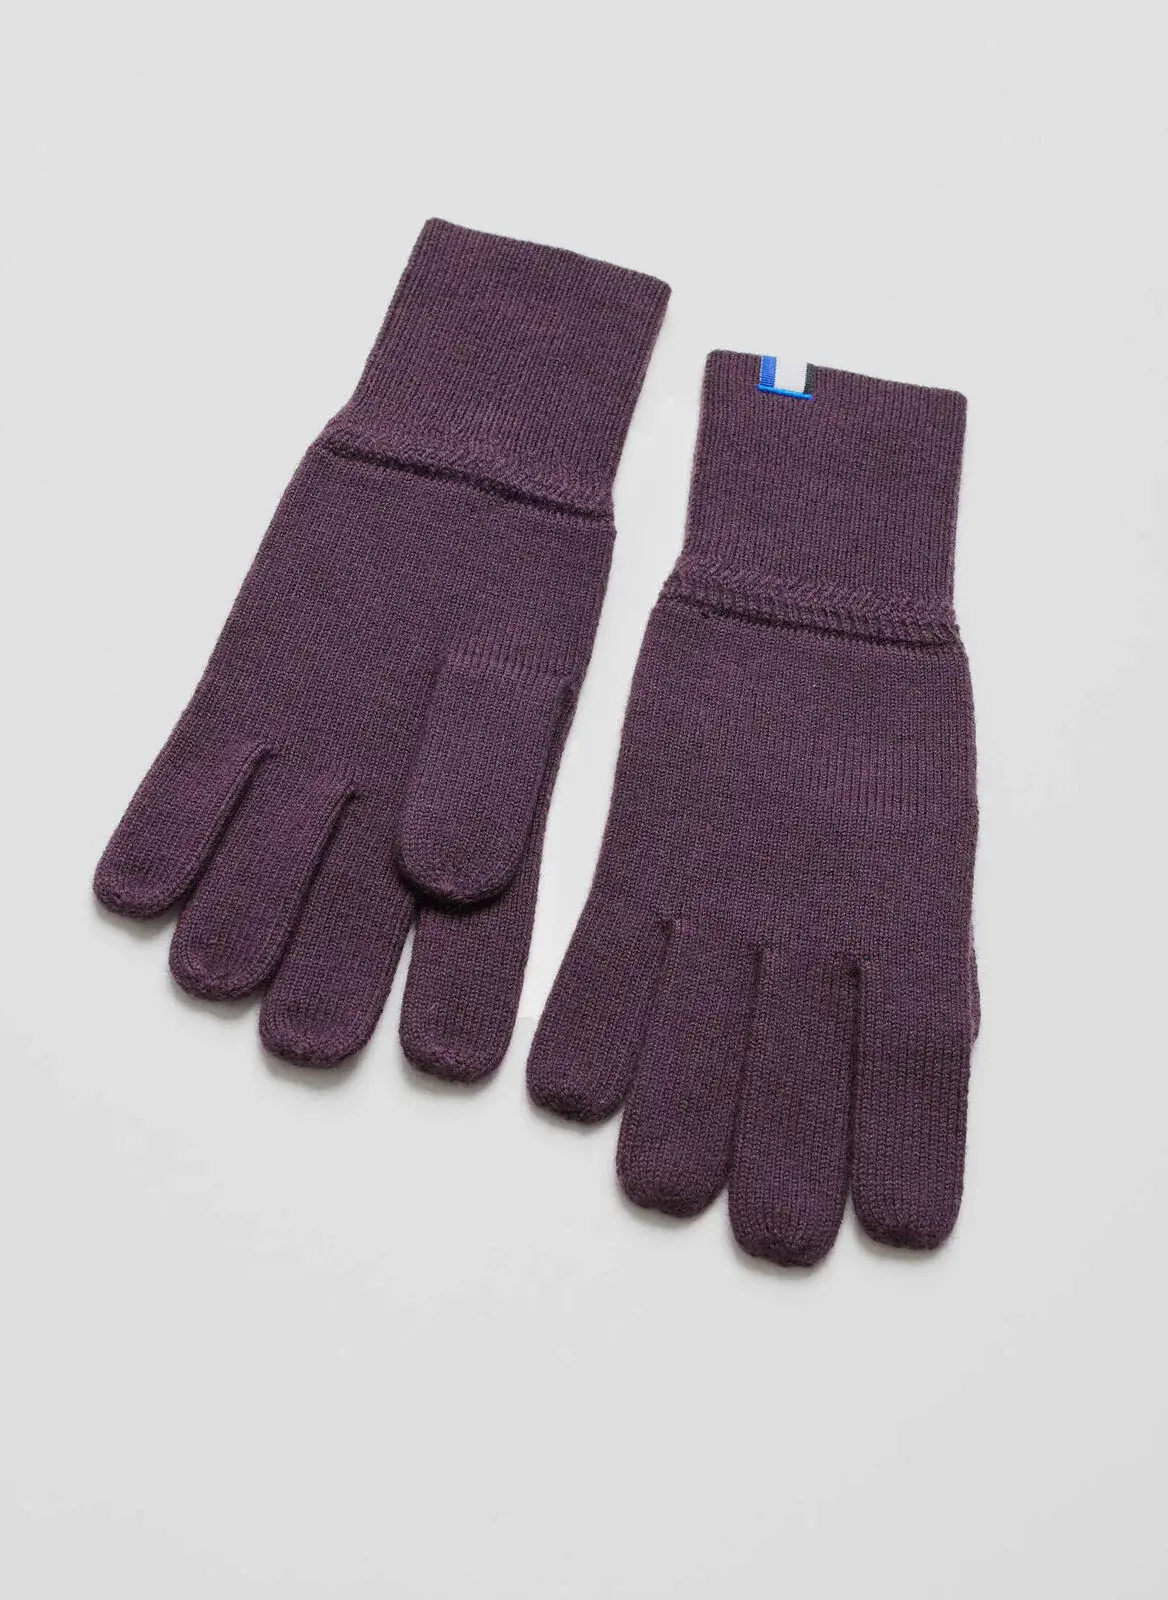 Kit And Ace Cozy Merino Gloves. 1